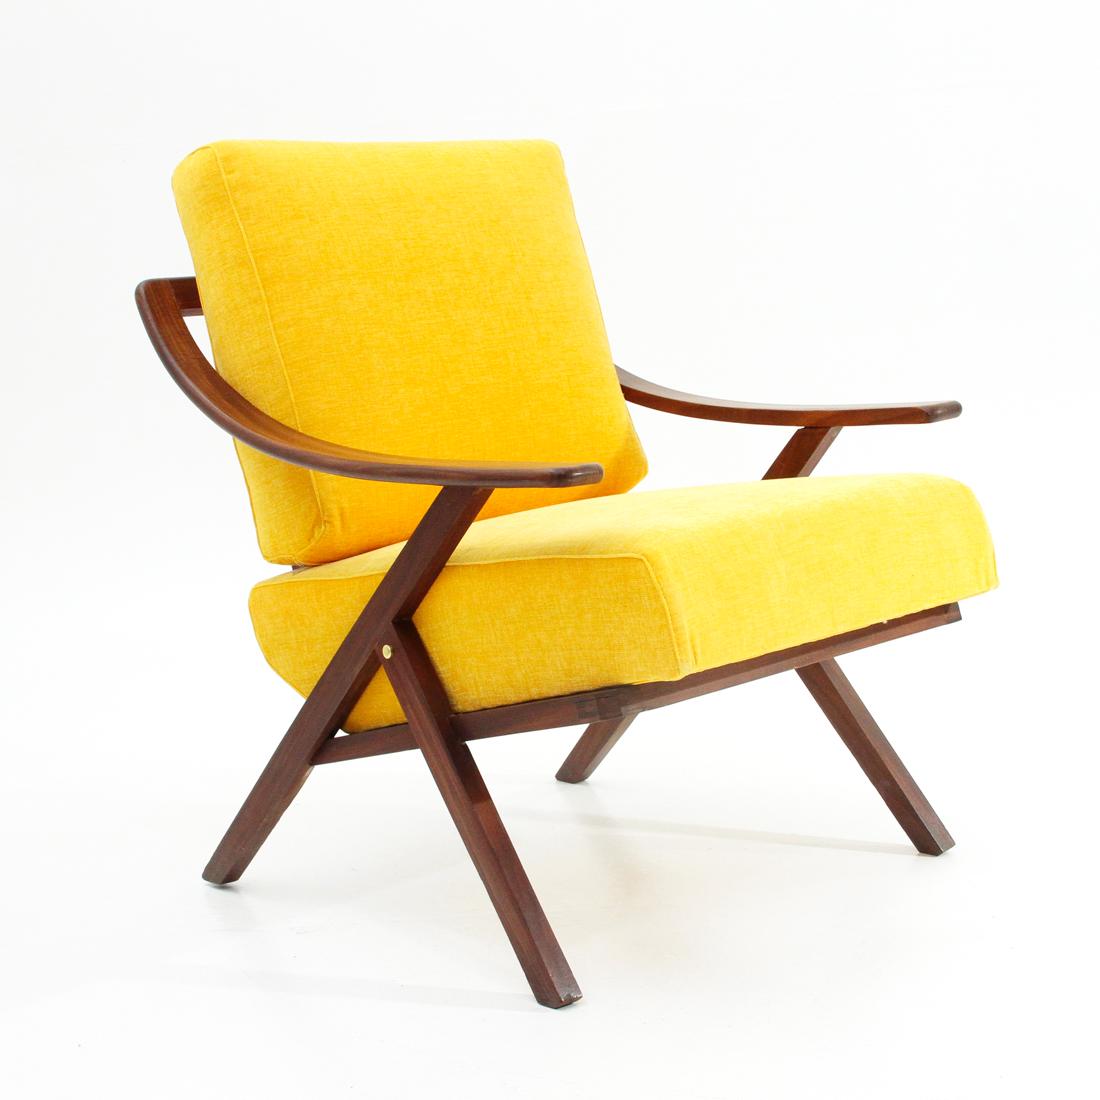 Italian manufacture armchair produced in the 1960s.
Solid wood structure.
Armrests in curved wood.
Seat and back upholstered and lined in new yellow velvet fabric.
Good general conditions, some signs due to normal use over time.

Dimensions: